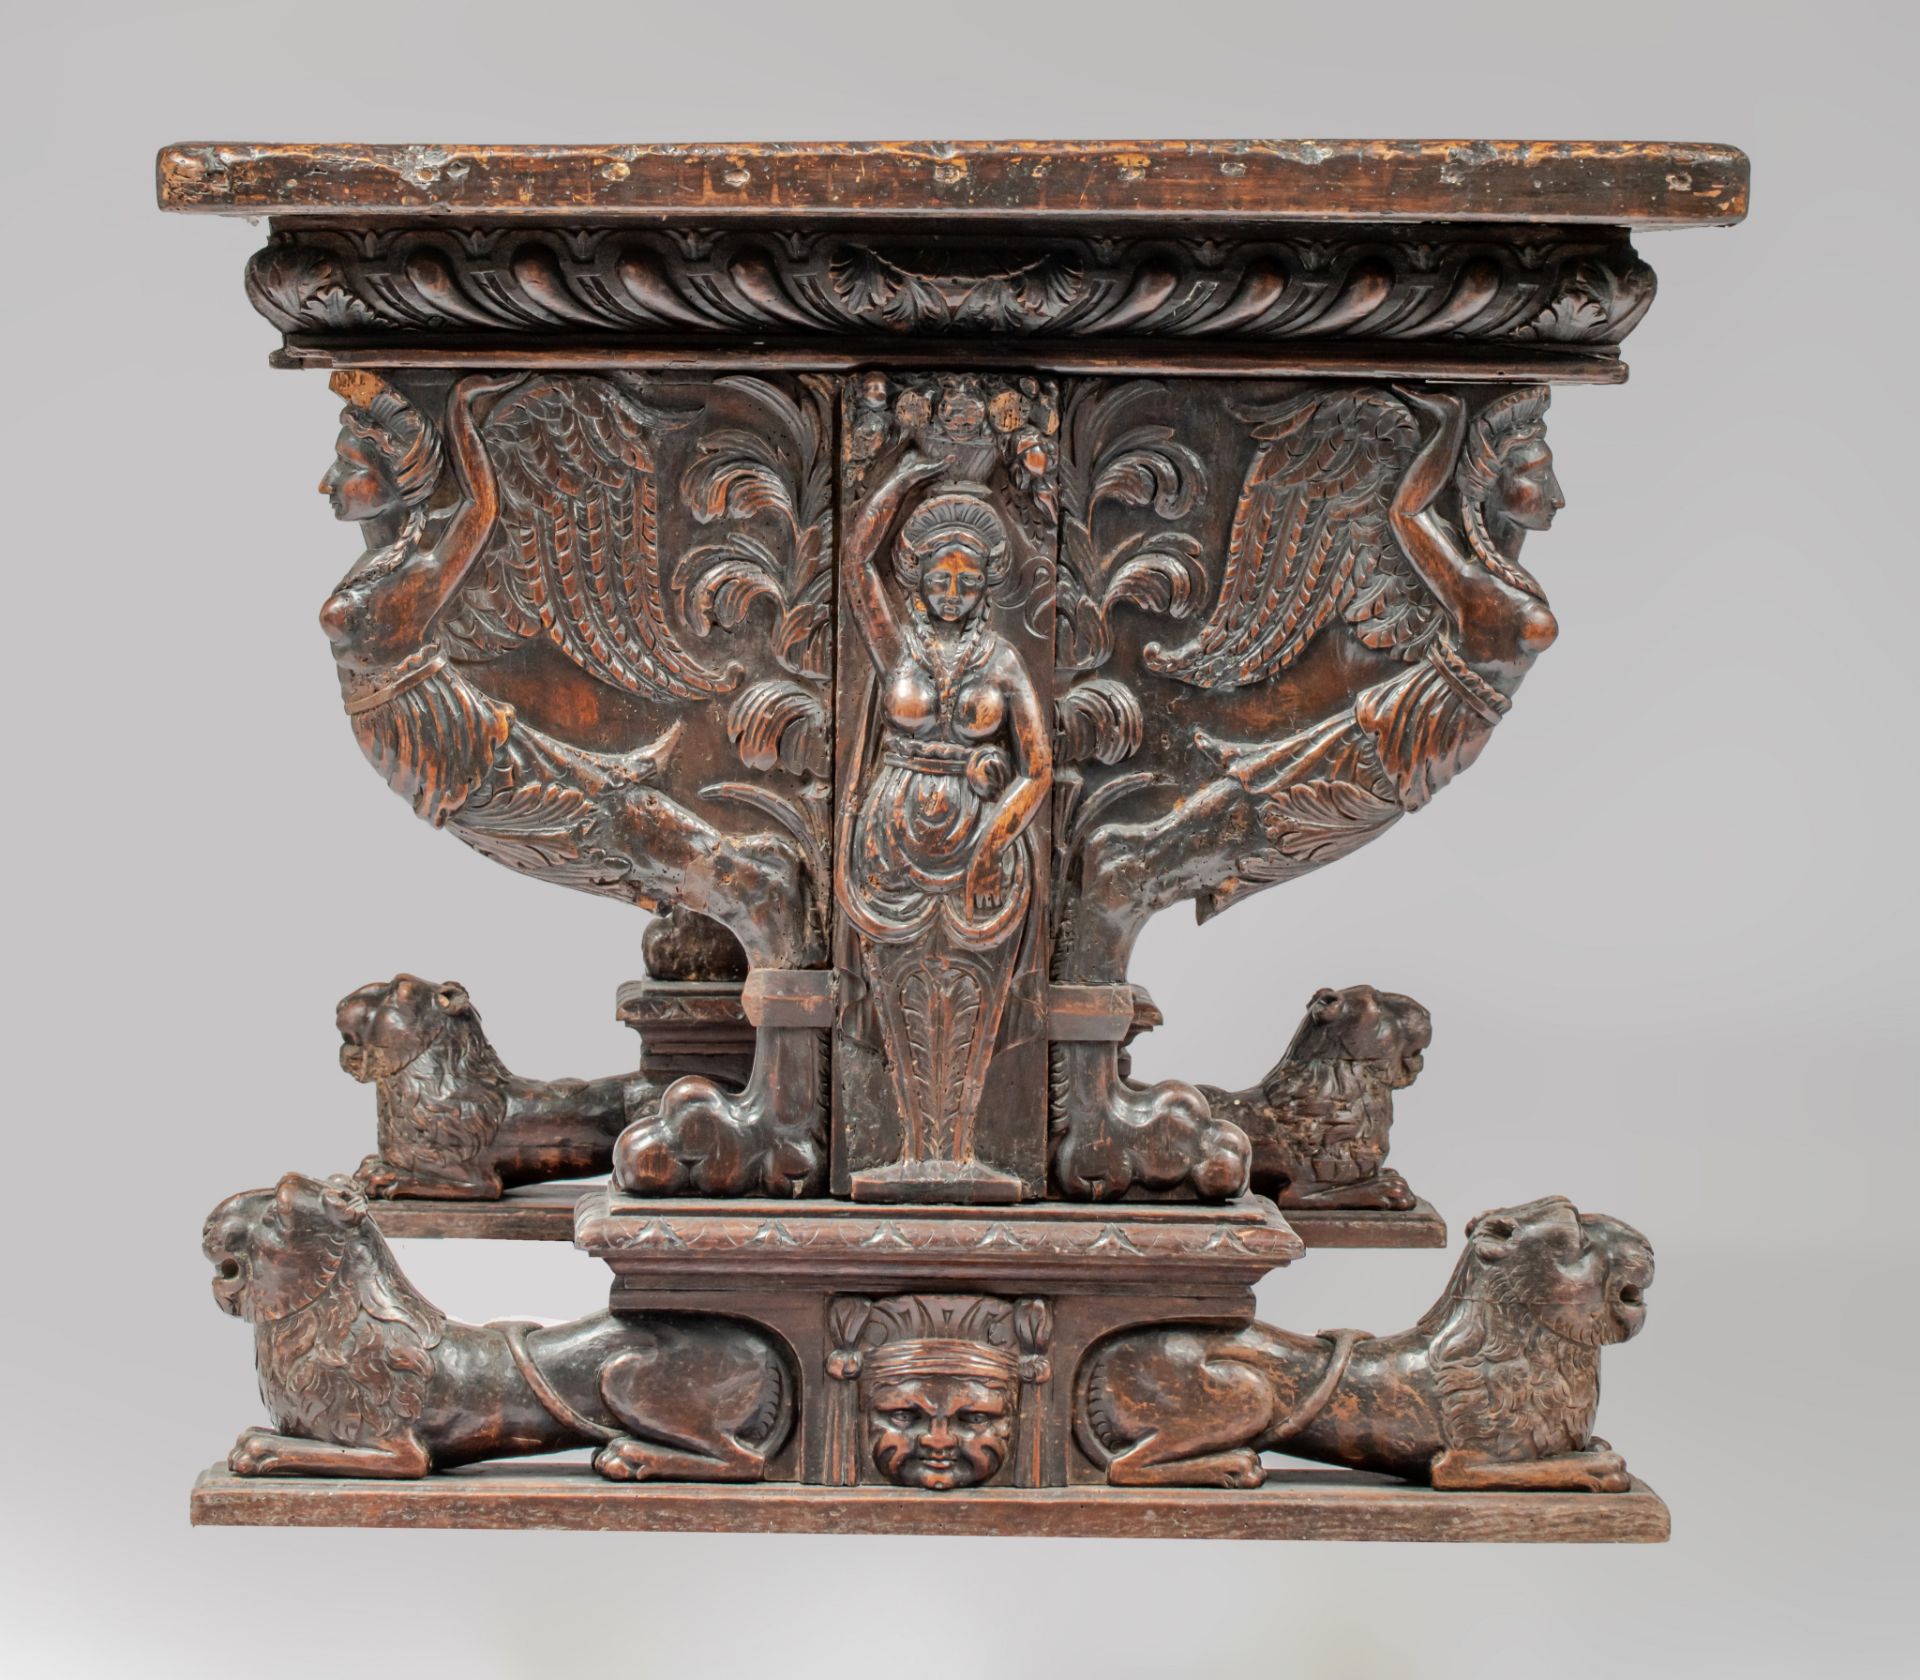 An exceptional Italian Renaissance carved walnut centre table, 16th/17thC, H 82 - W 165 - D 86,5 cm - Image 6 of 12